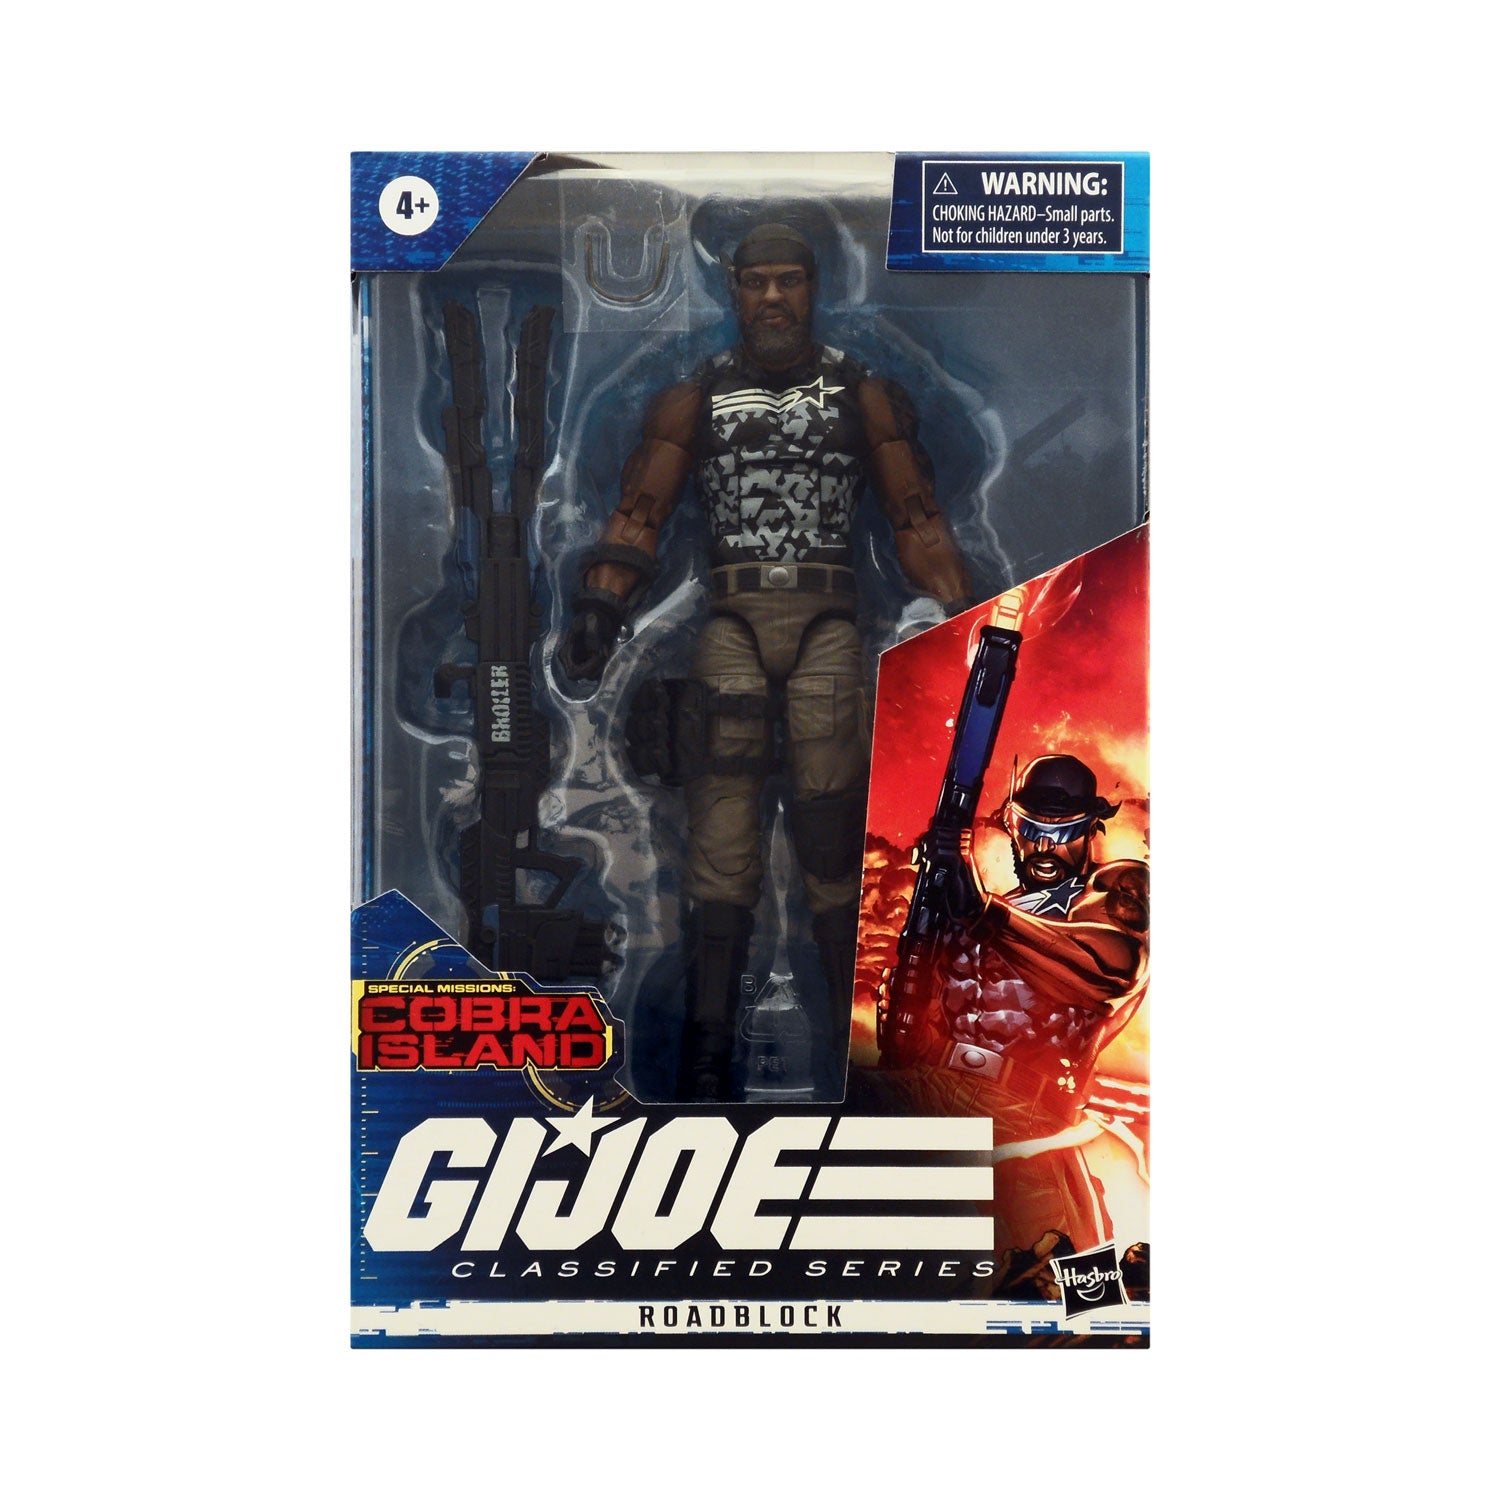 G.I. Joe Classified Series Special Missions: Cobra Island Roadblock 6- –  Action Figures and Collectible Toys